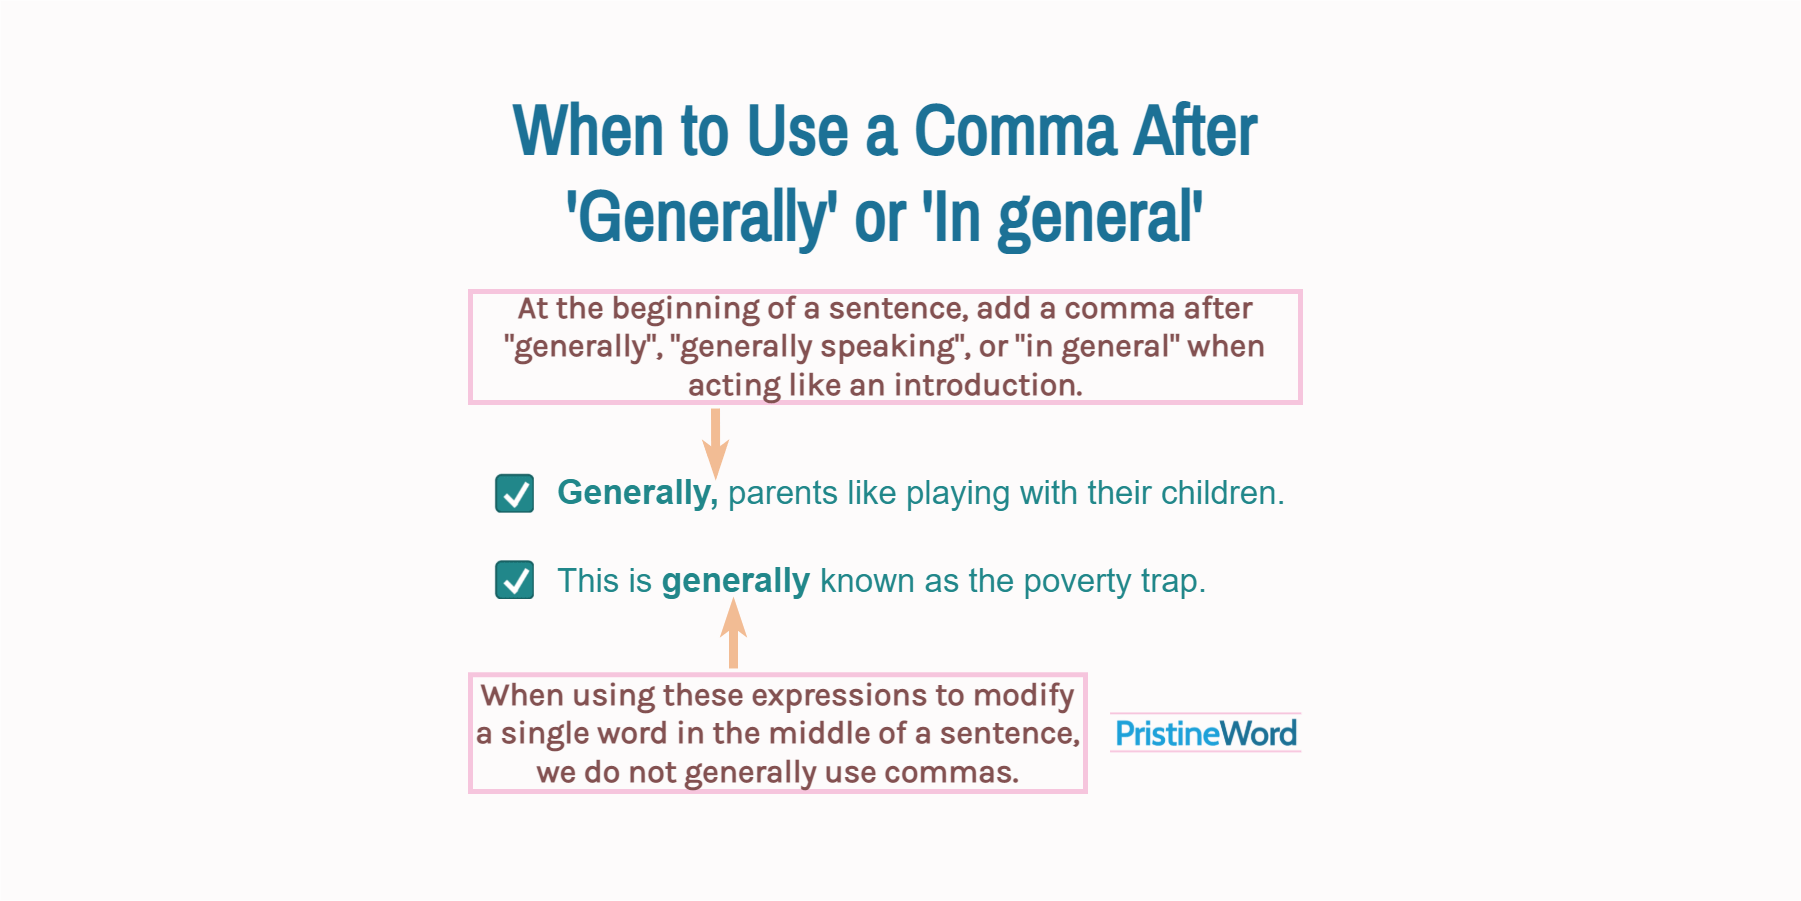 When to Use a Comma after 'Generally', 'Generally speaking', or 'In general'